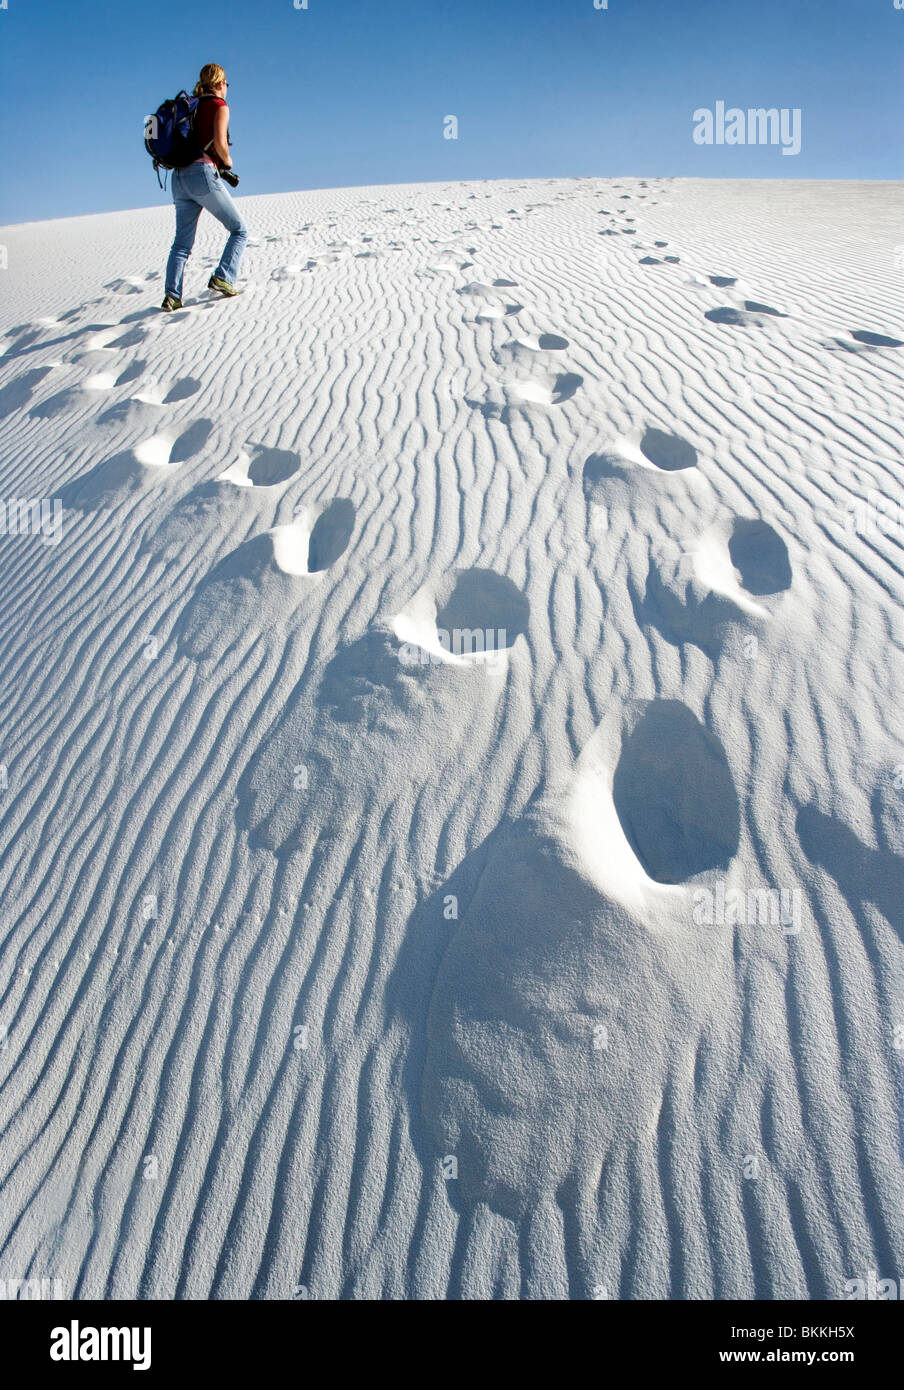 A person walking up a large white sand dune at White Sands National Monument, New Mexico. Stock Photo